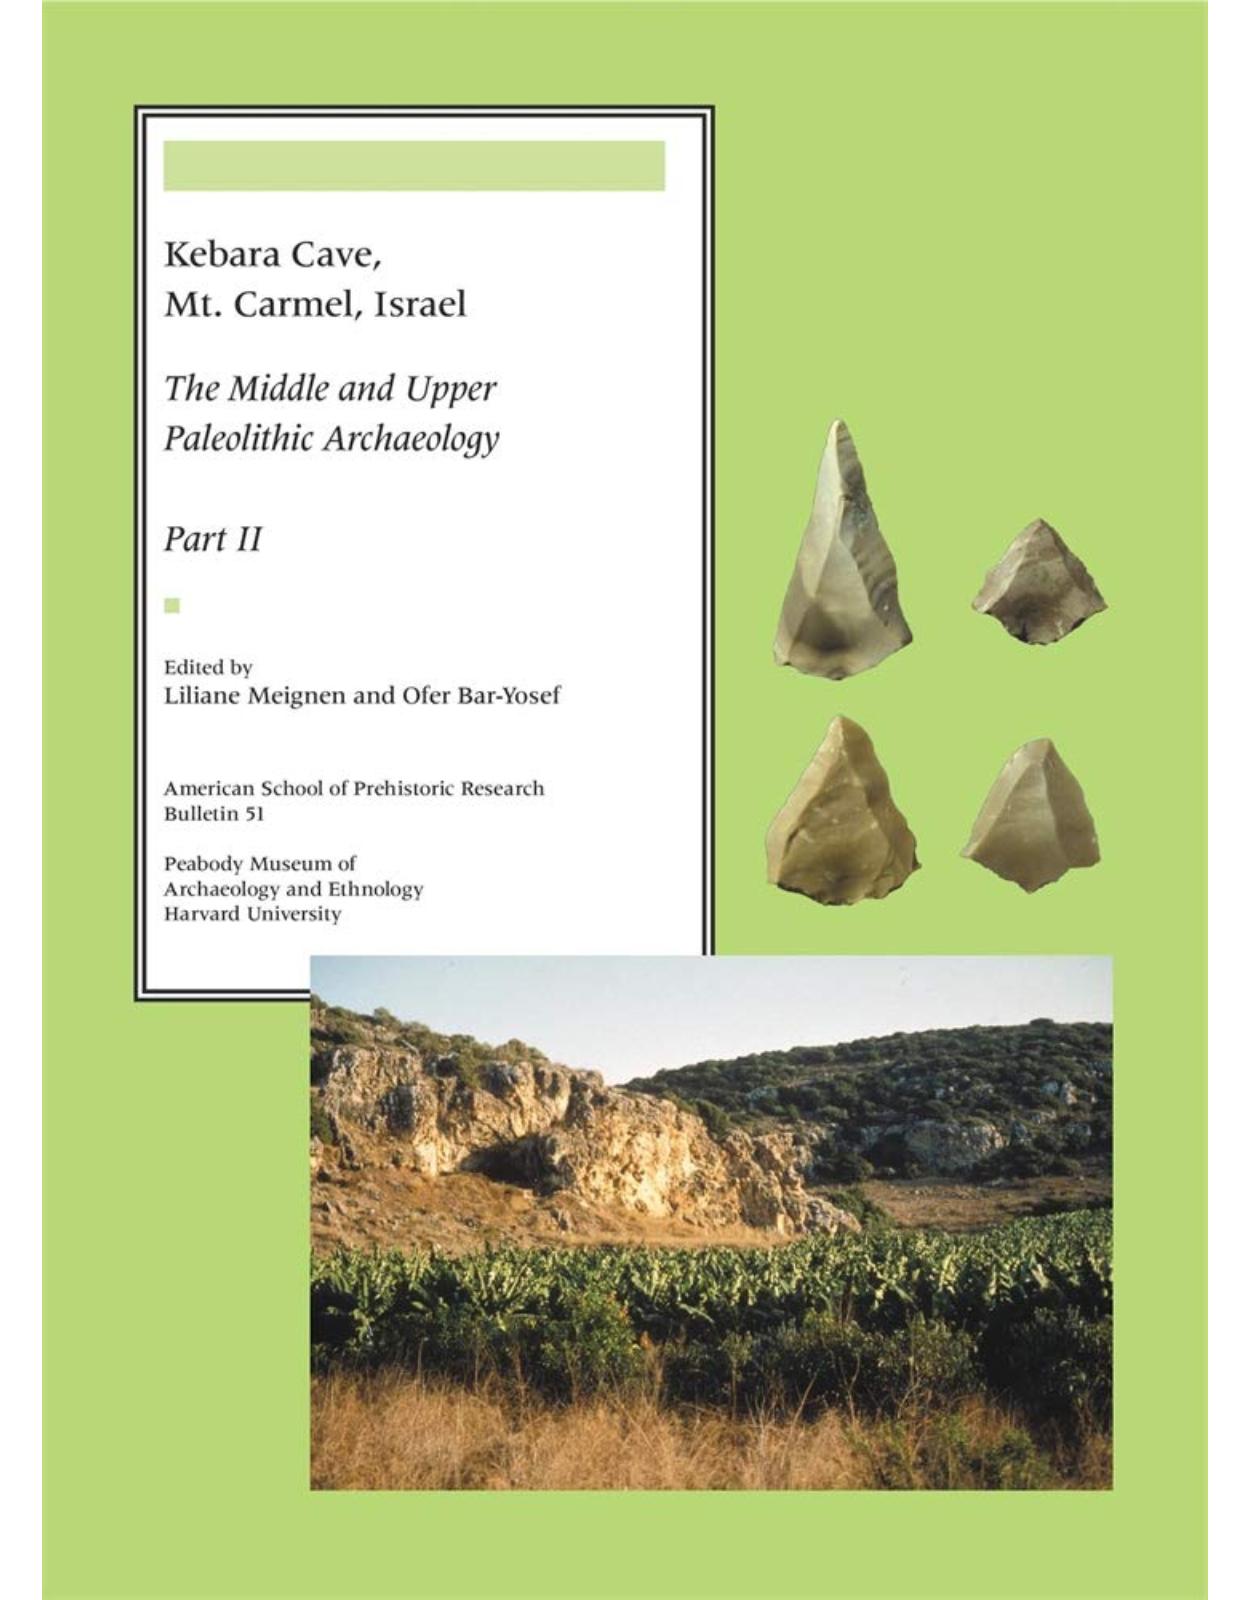 Kebara Cave, Mt. Carmel, Israel, Part II â€“ The Middle and Upper Paleolithic Archaeology